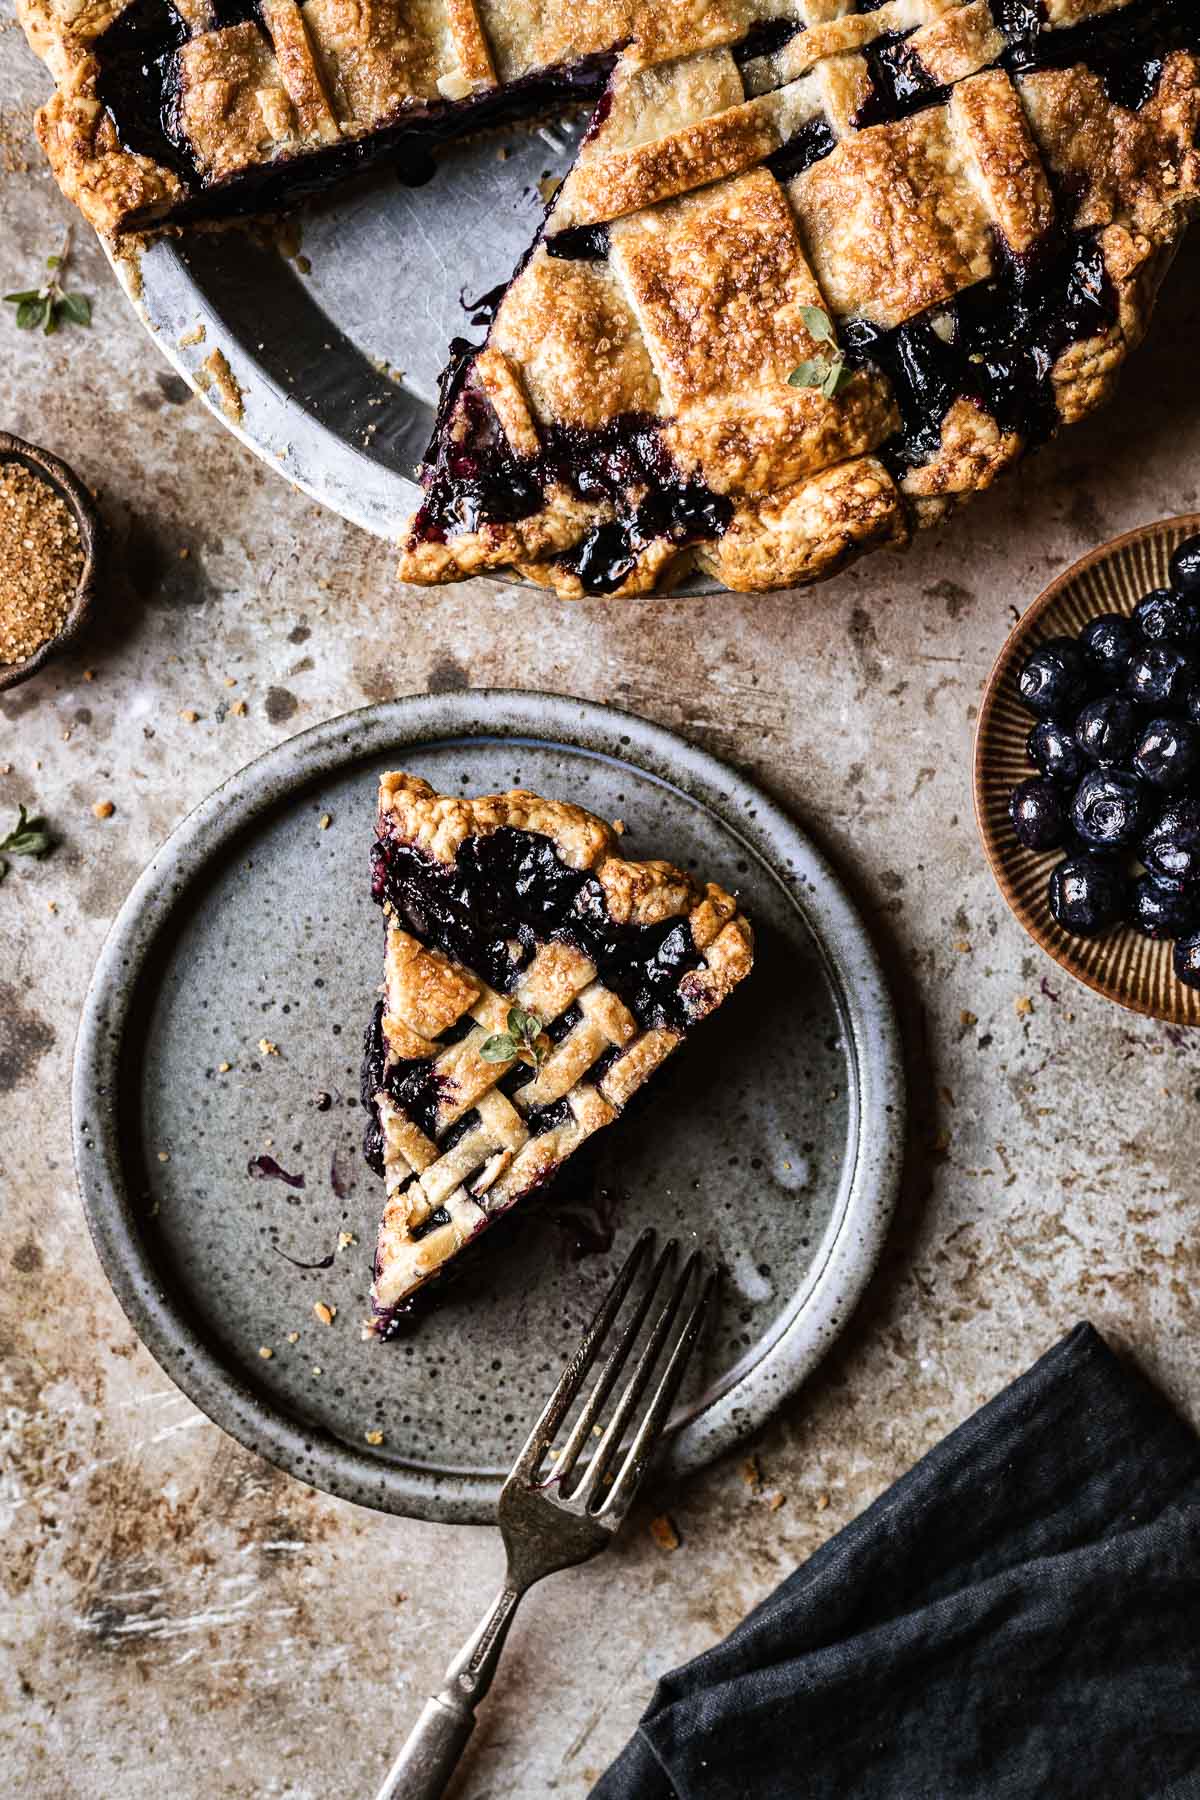 A slice of lattice topped blueberry pie on a grey ceramic plate. The rest of the pie peeks into view at top.